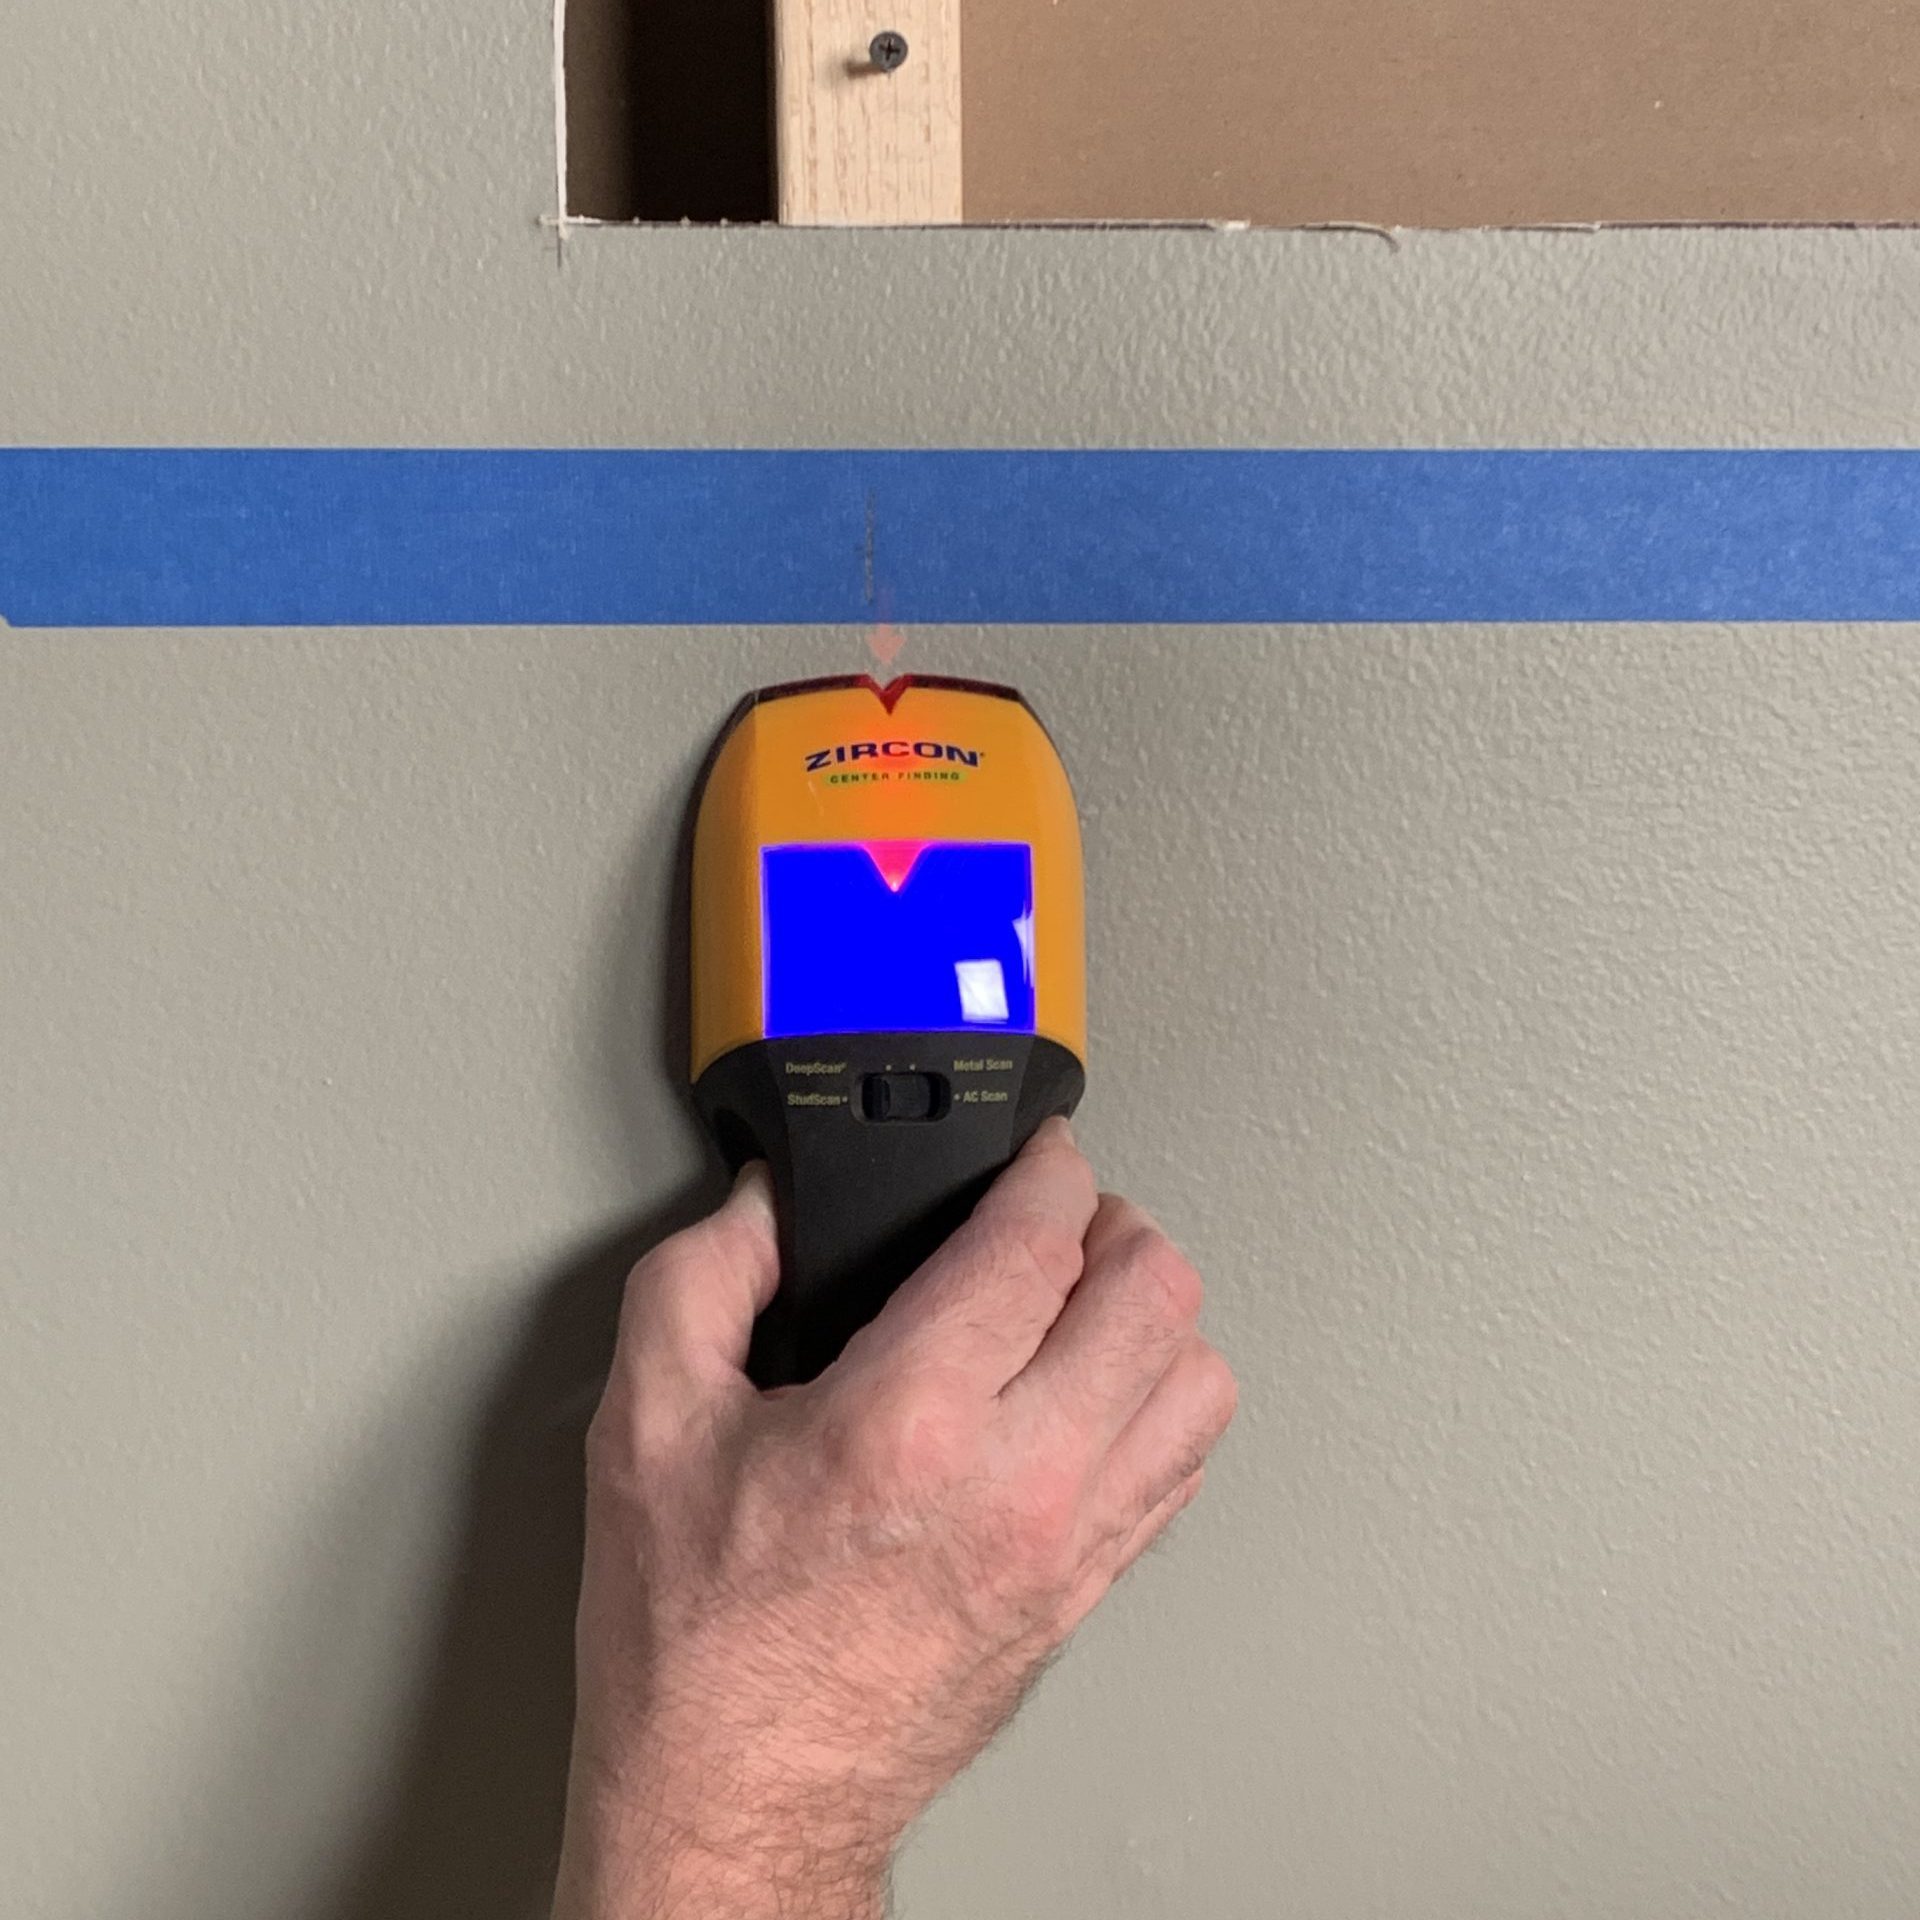 How to Use a Stud Finder: 7 Easy Steps to Finding a Stud (Every Time)